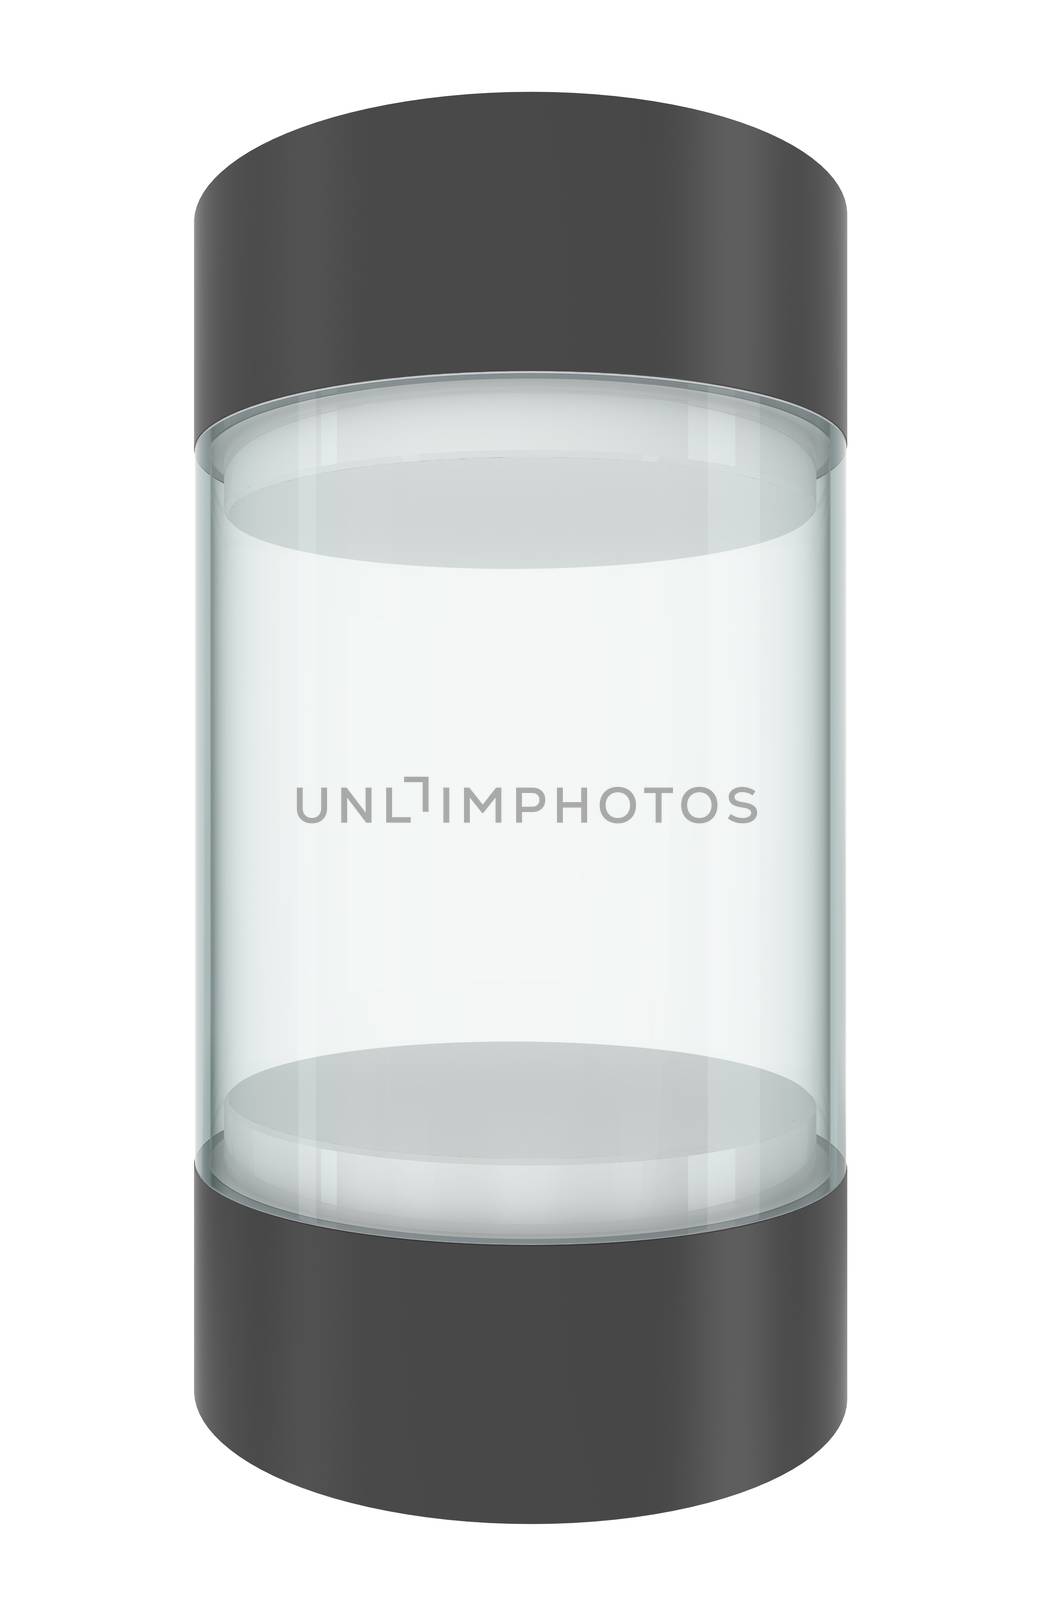 Glass empty showcase with pedestal and cap, isolated on white. 3D illustration